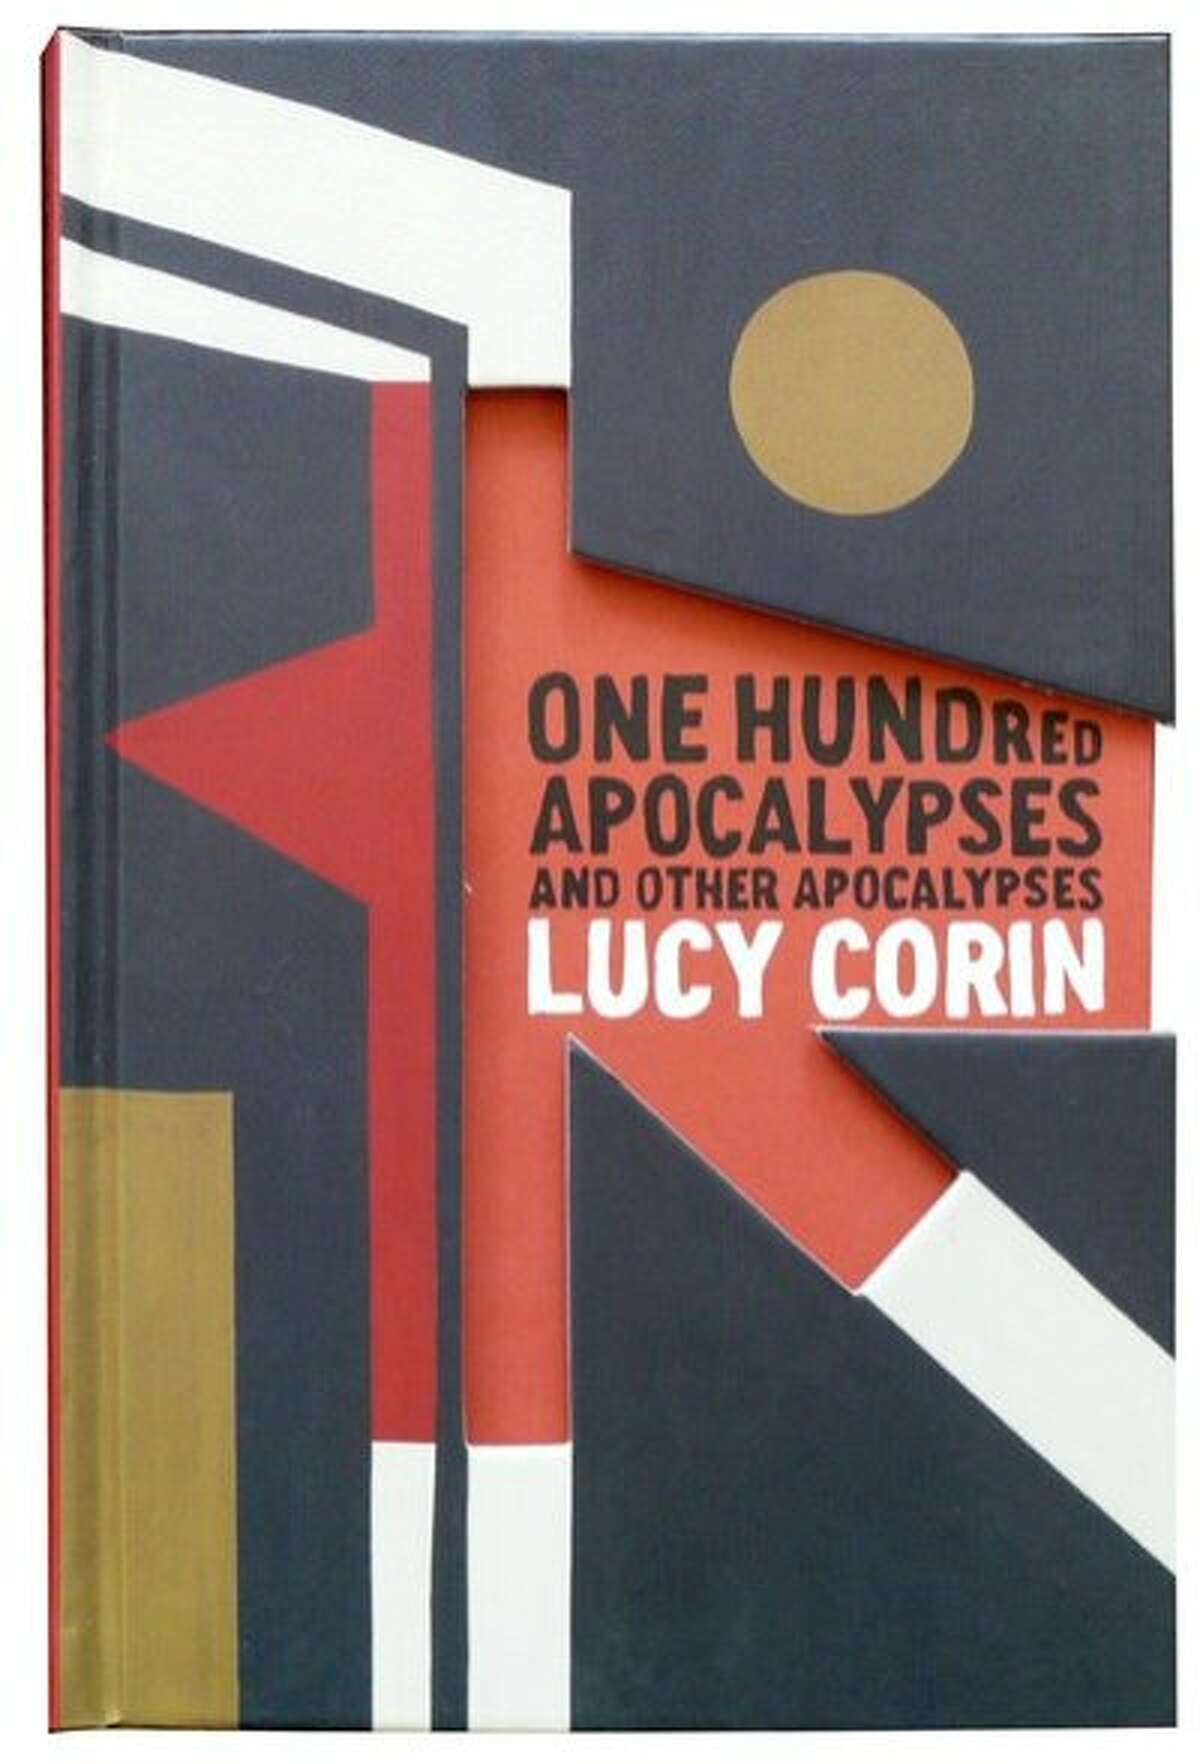 Cover of “One Hundred Apocalypses and Other Apocalypses,”